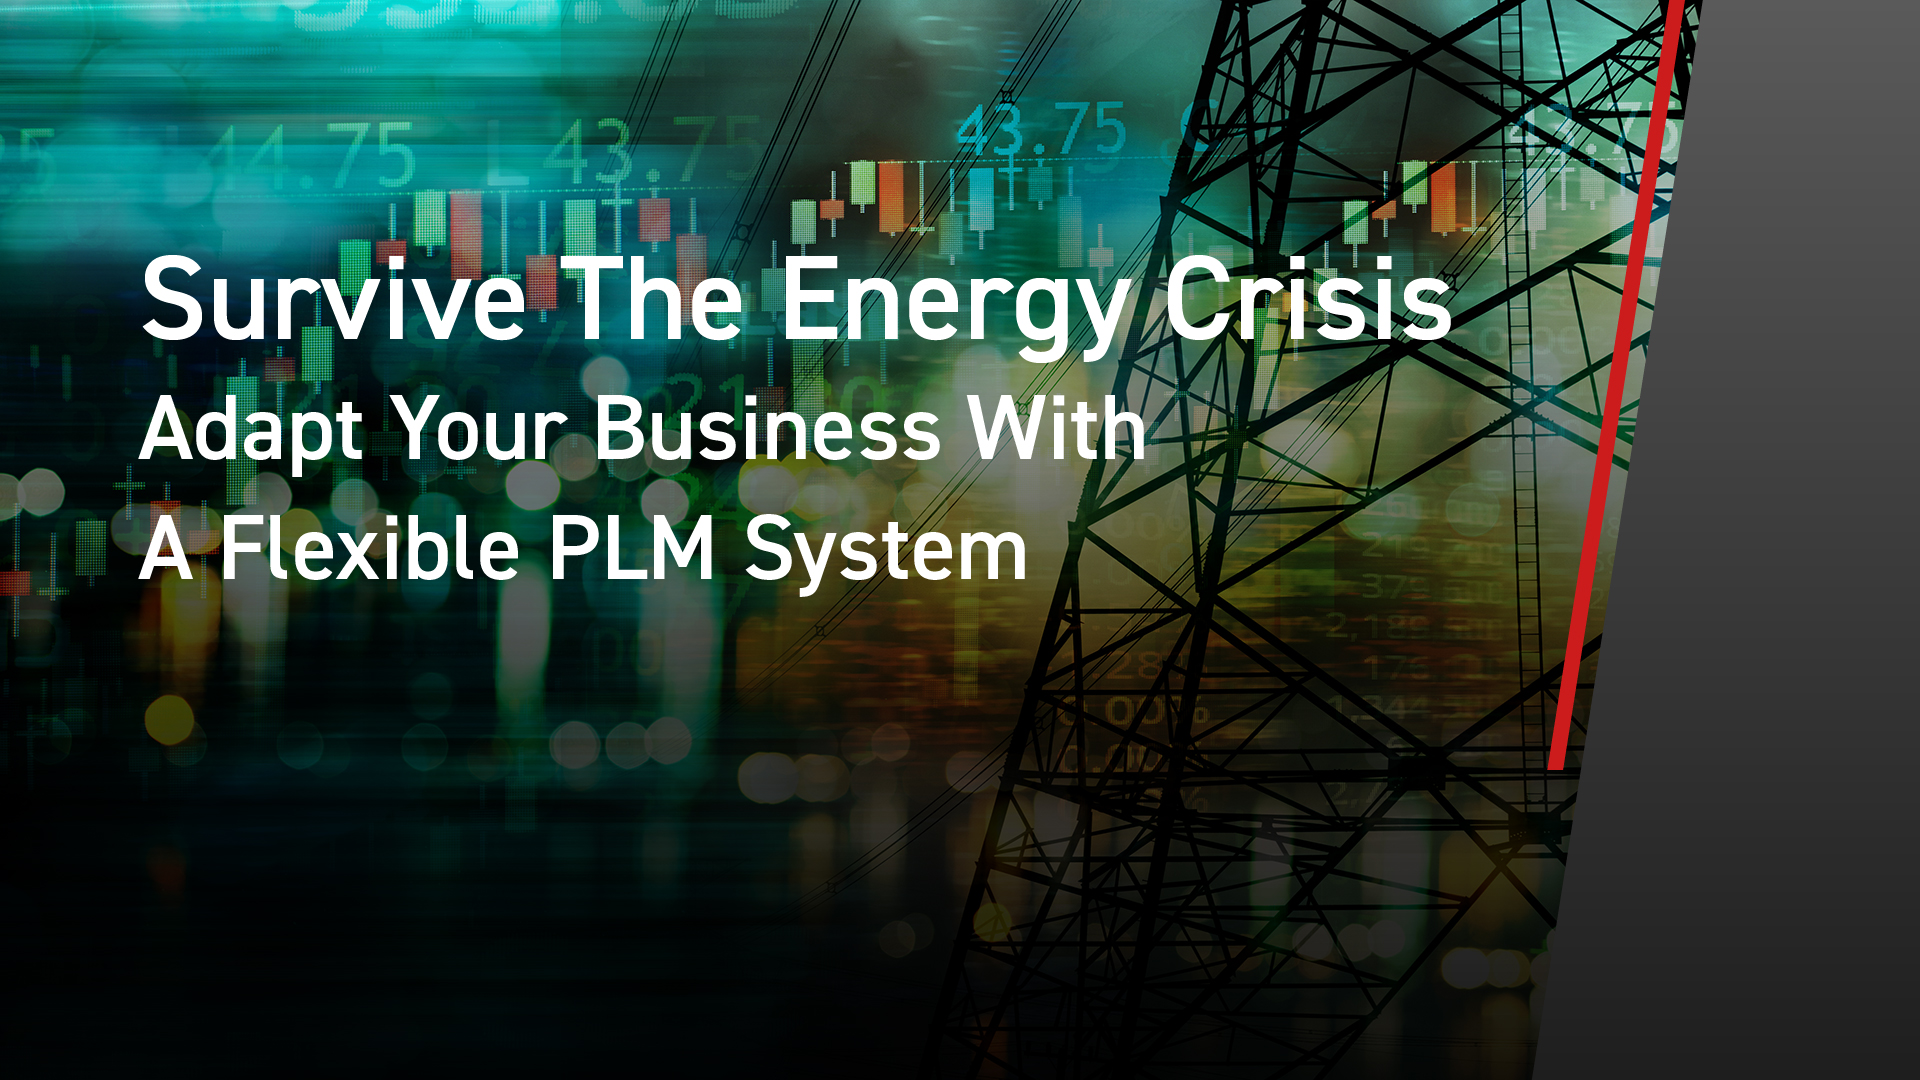 Survive The Energy Crisis. Adapt Your Business With A Flexible PLM System